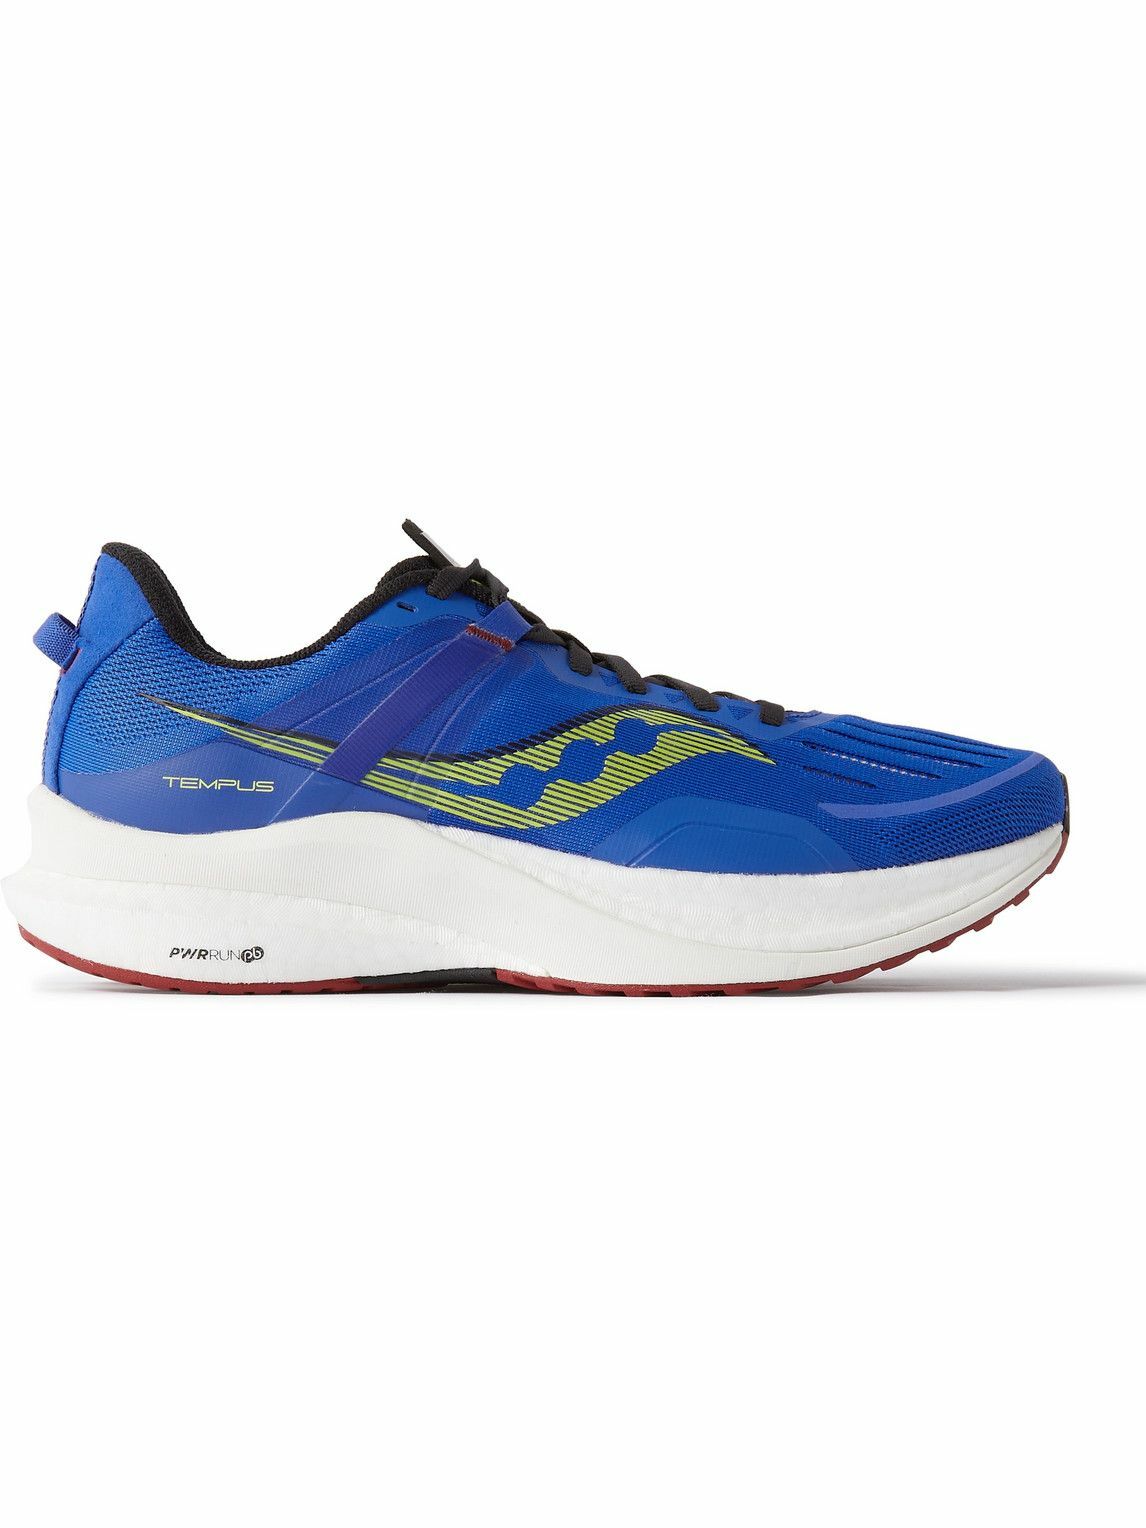 Photo: Saucony - Tempus Rubber-Trimmed Mesh Running Sneakers - Blue